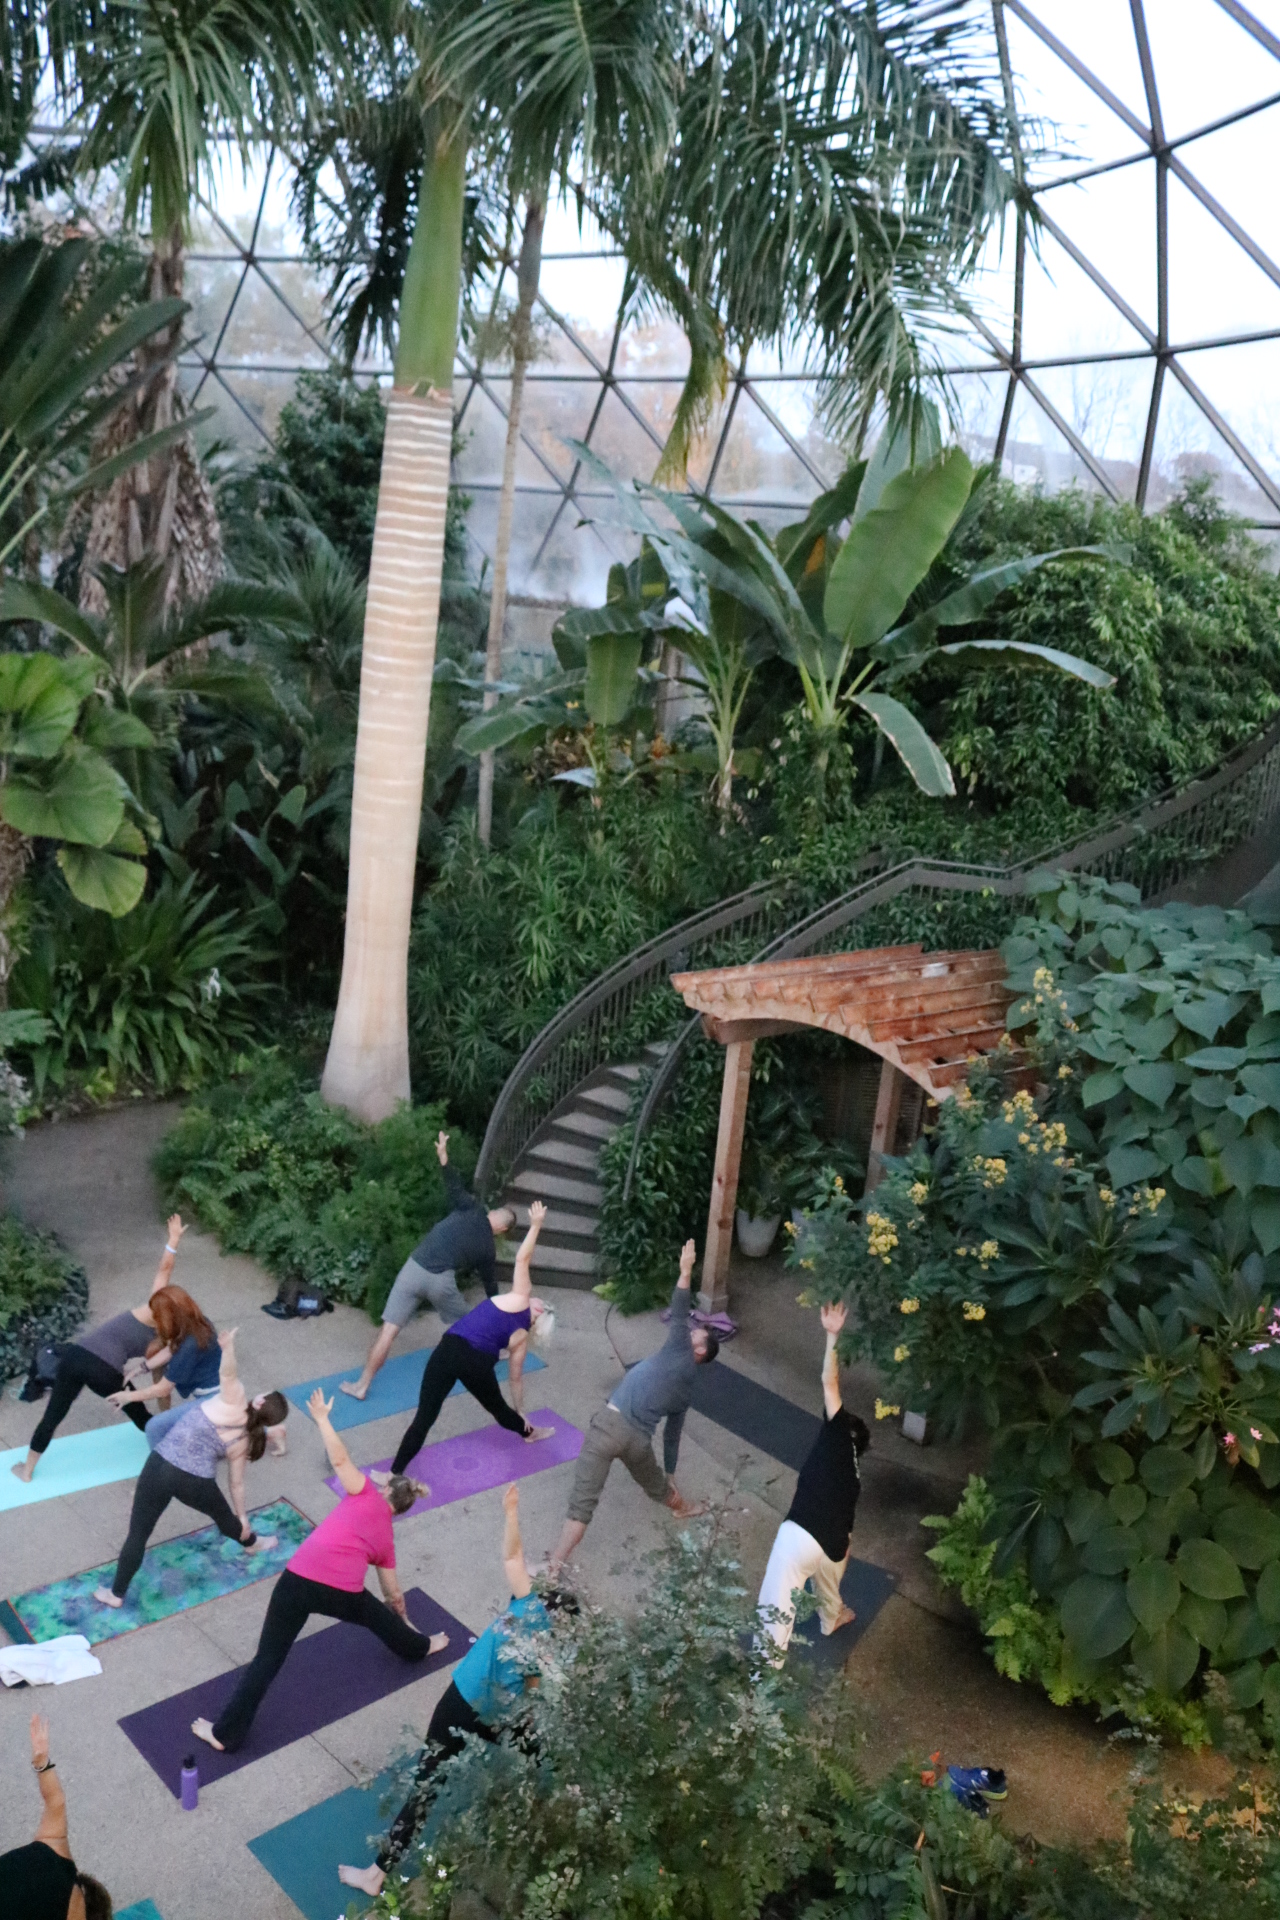 People doing yoga in a geodesic dome.